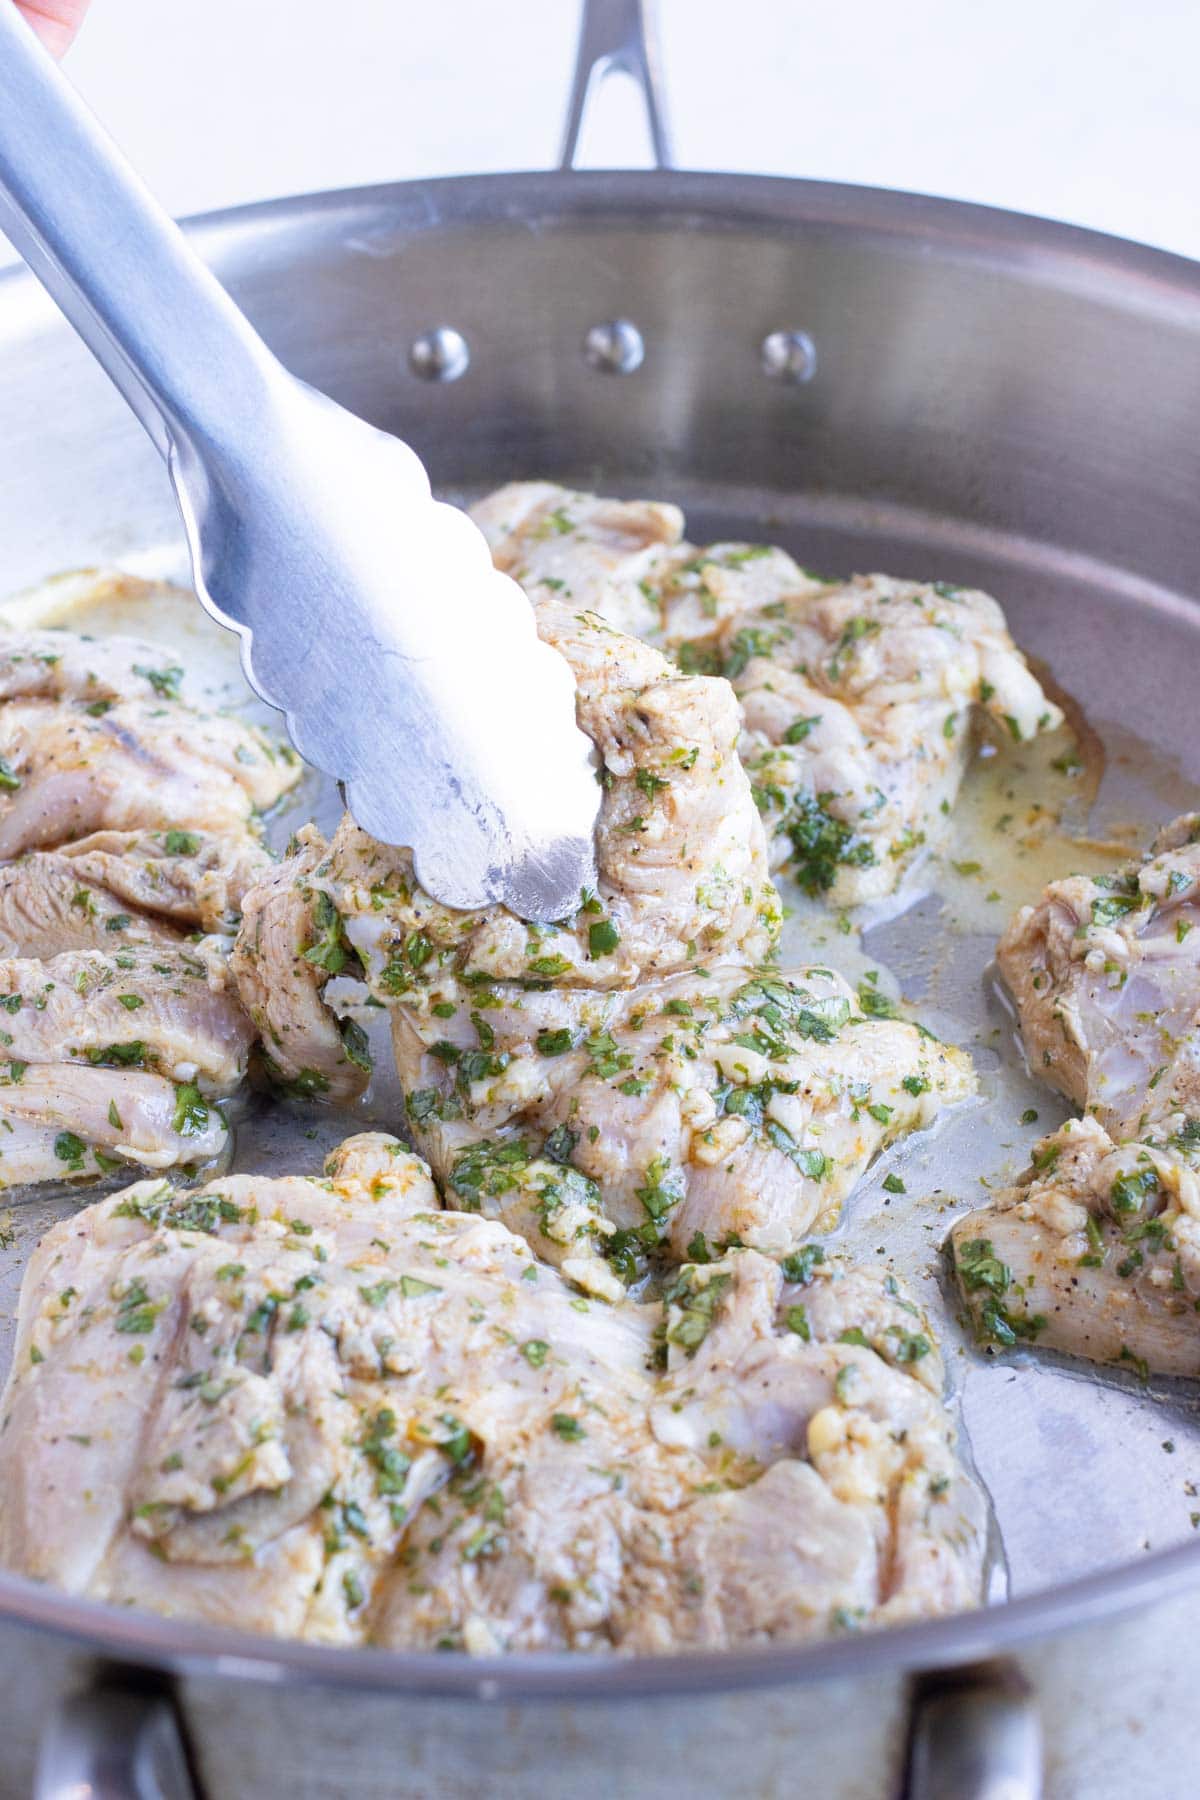 Prepared chicken thighs are cooked in a skillet with oil.